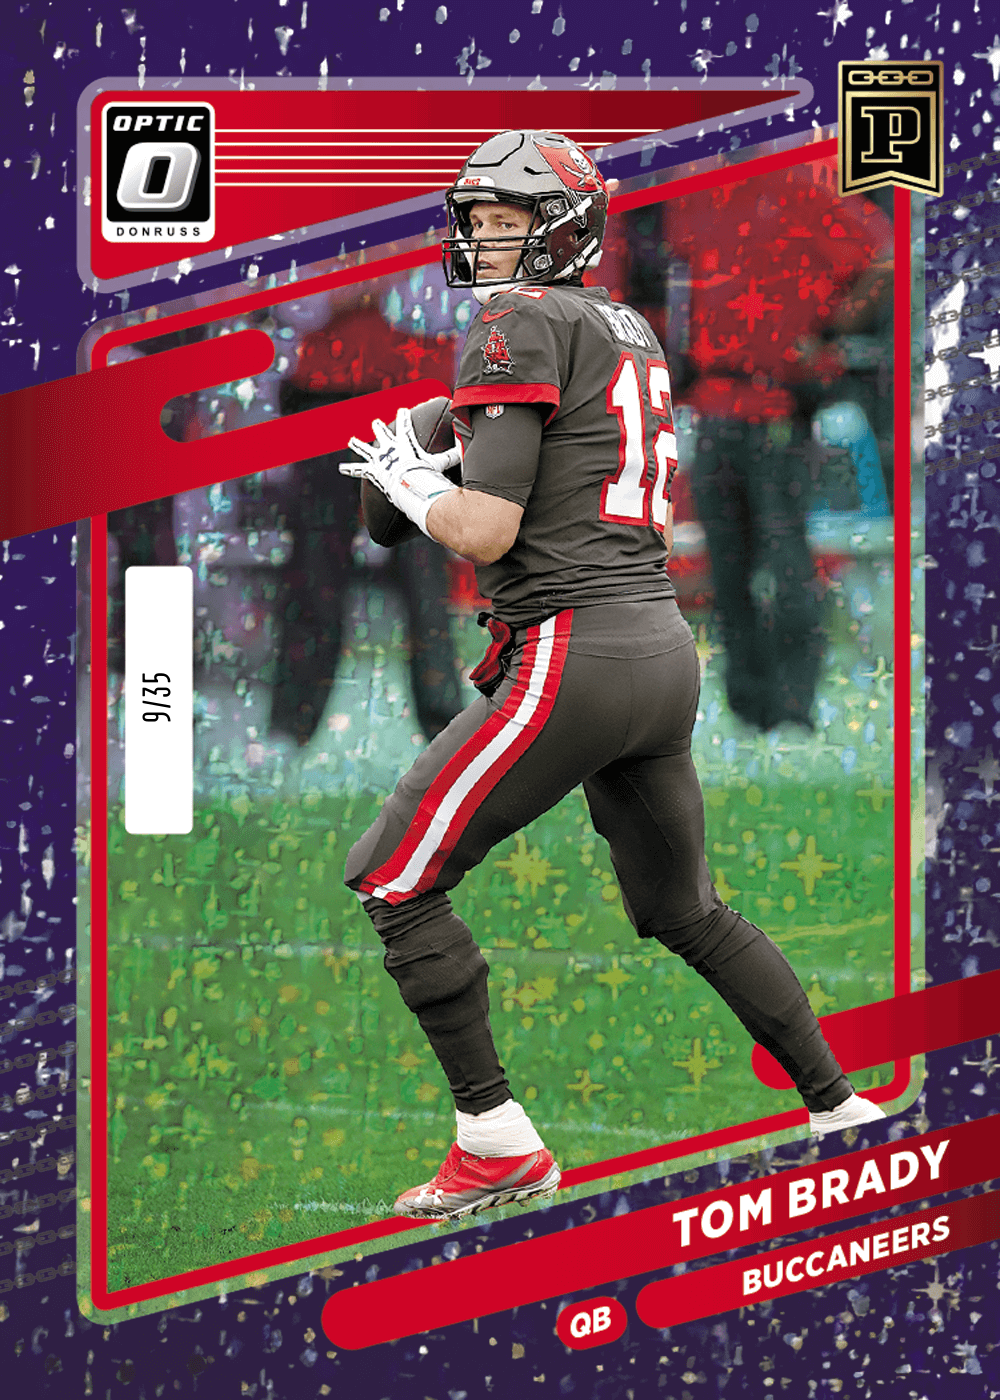 Tom Brady Holofoil Arena Card NFT for Sale - Man in the Arena: Tom